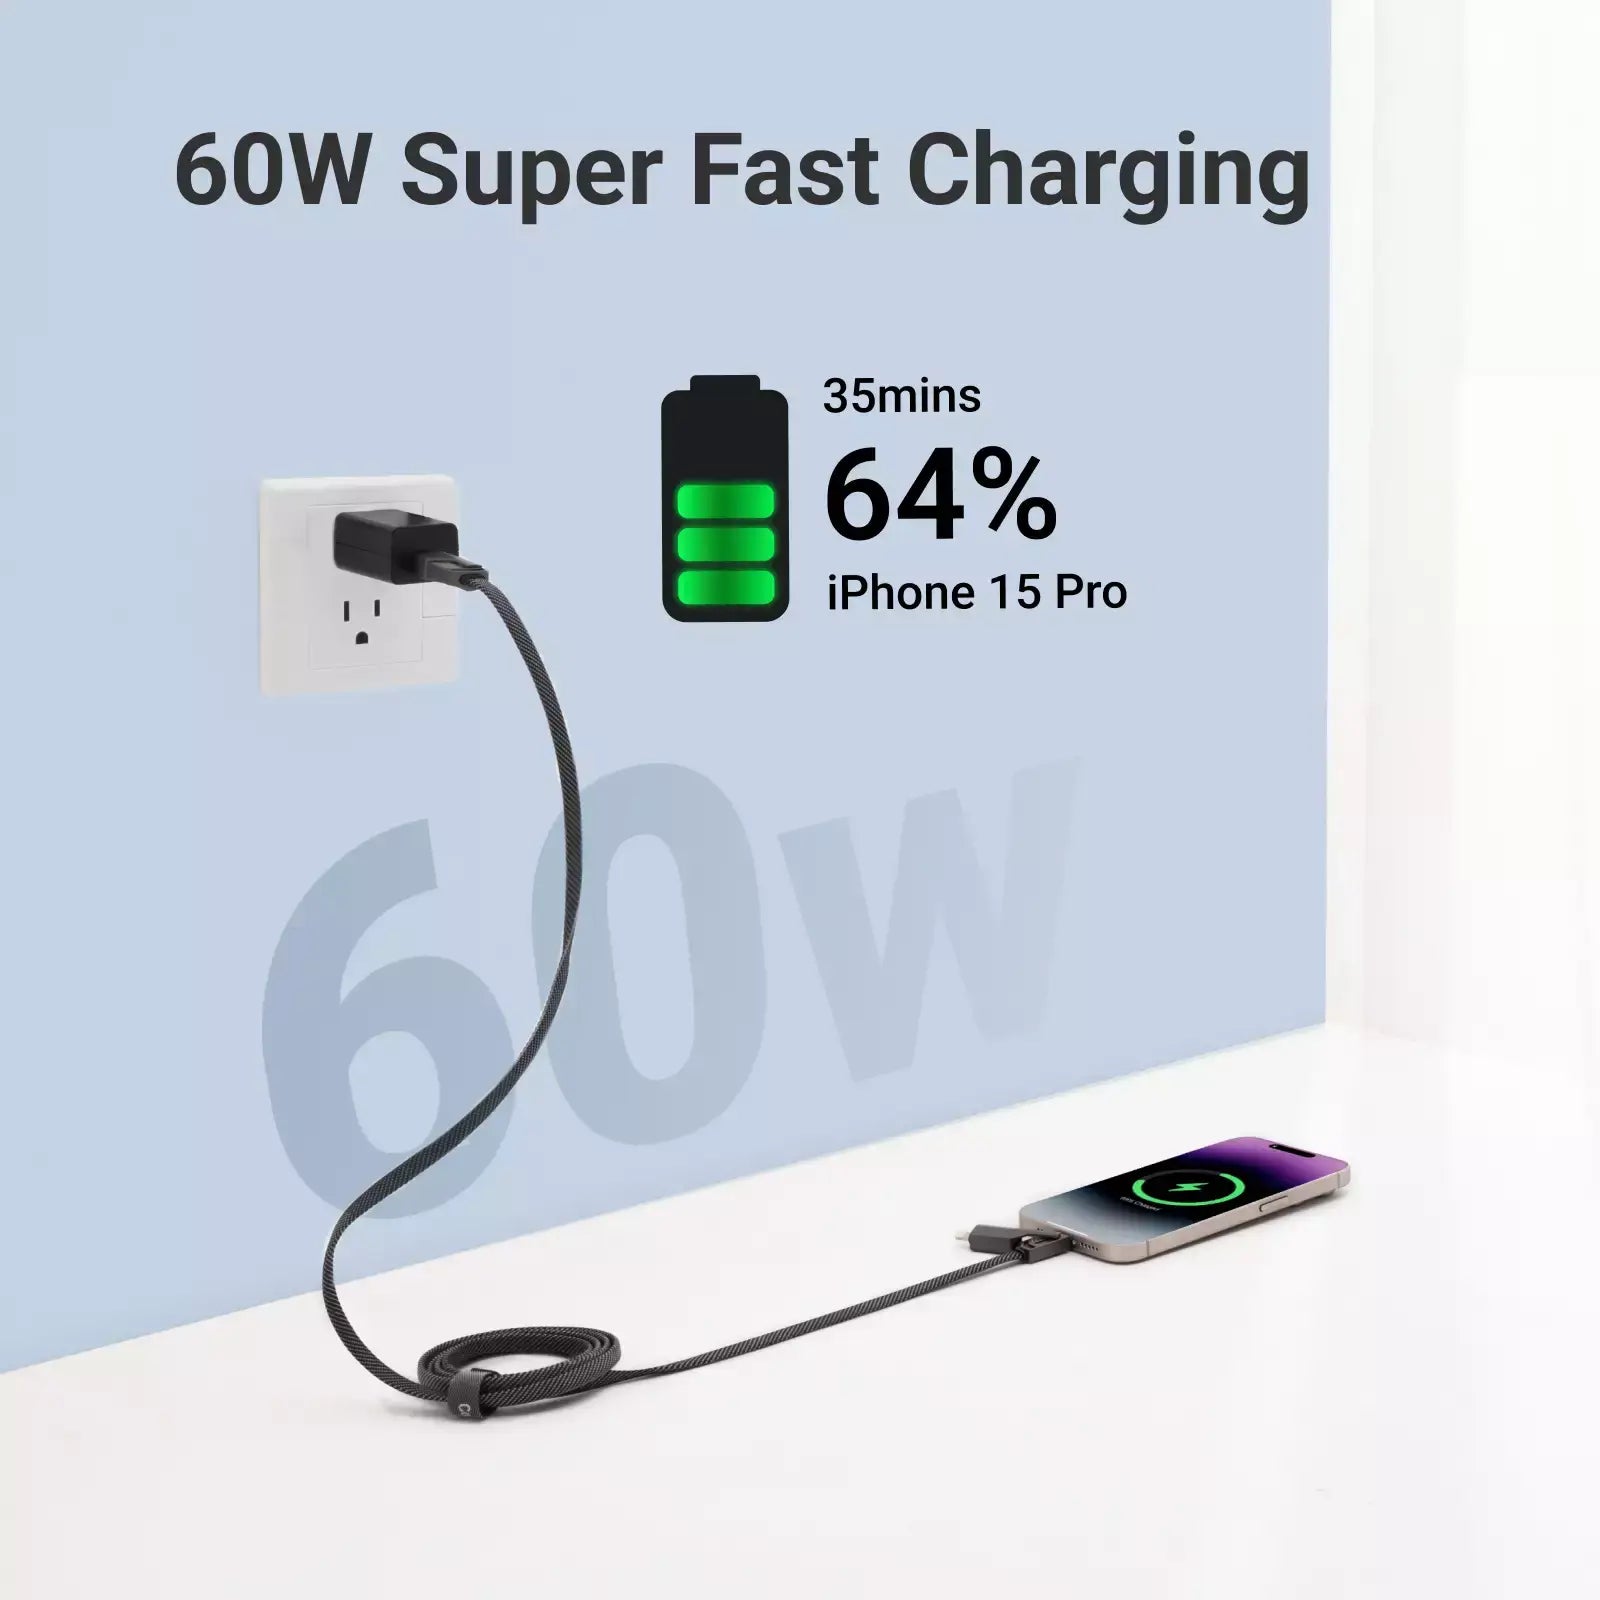 cool-gadget-6-in-1-60w-nylon-fast-charging-usb-c-cable-with-apple-watch-charger-5ft-description7